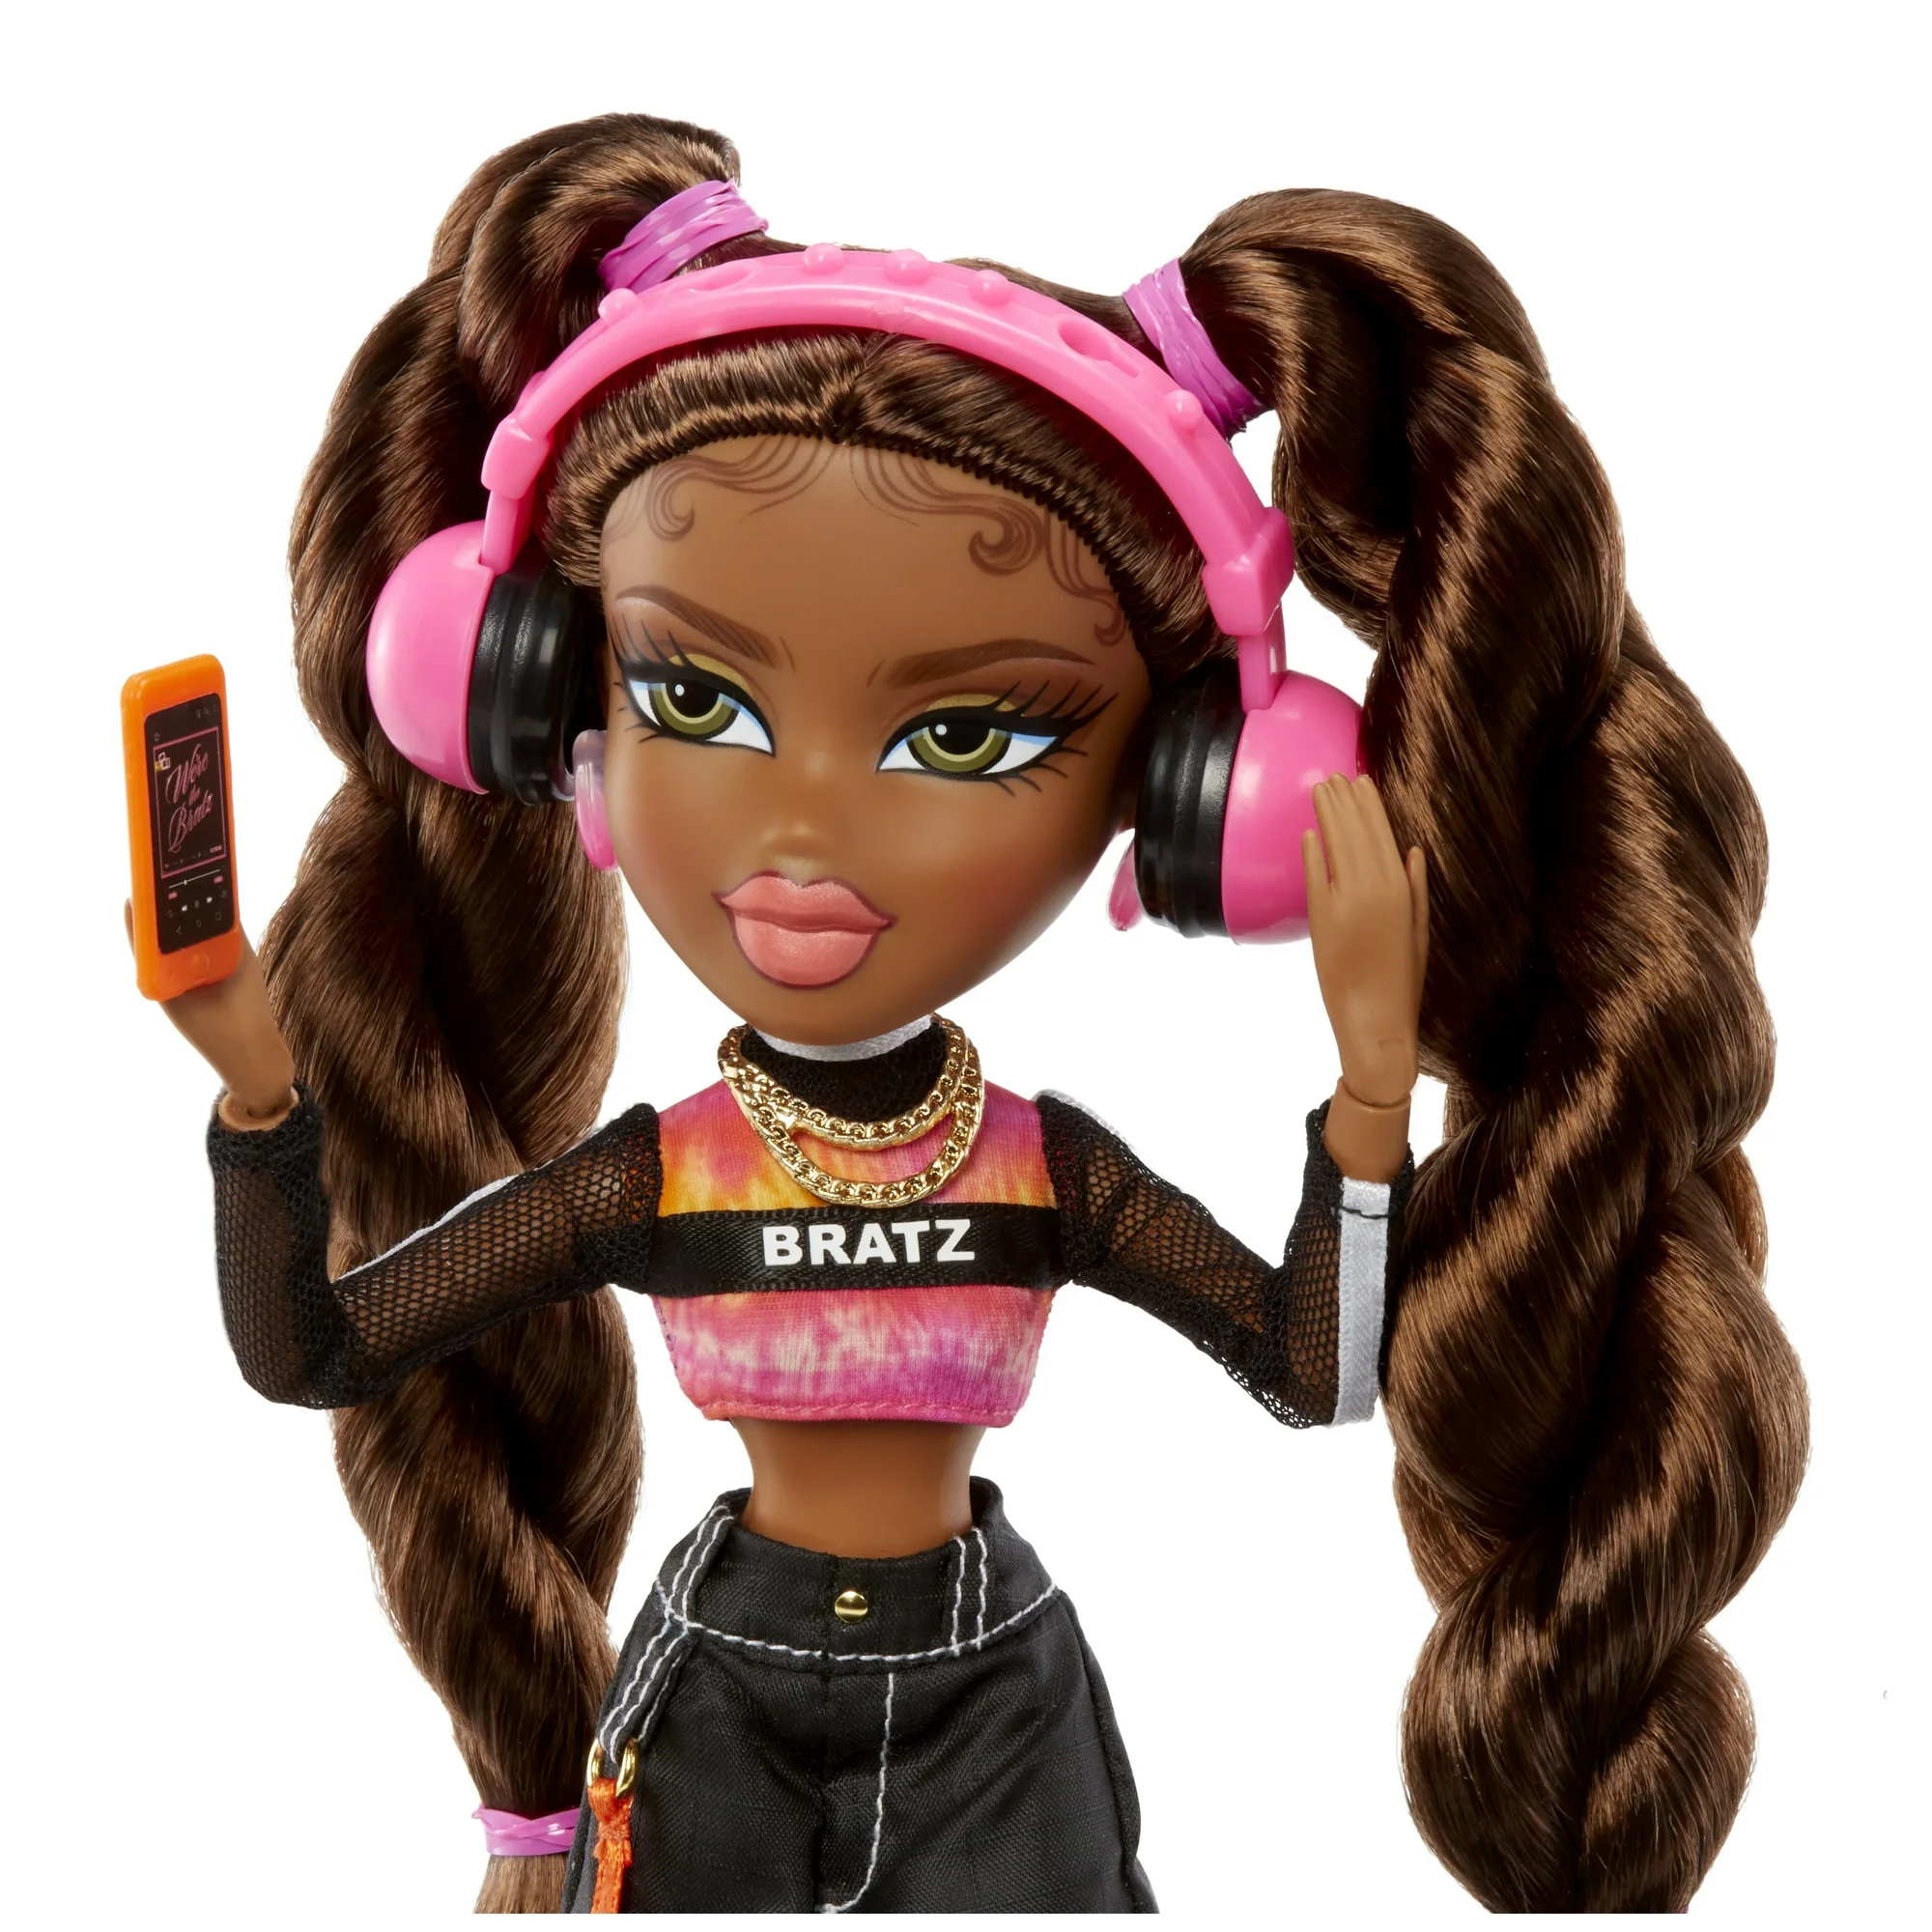 Excuse me, but that hair is everything. Magic Hair dolls ain't got nothing  on Alwayz Sasha. (Low pigtails was the way to go) ✨️ : r/Bratz